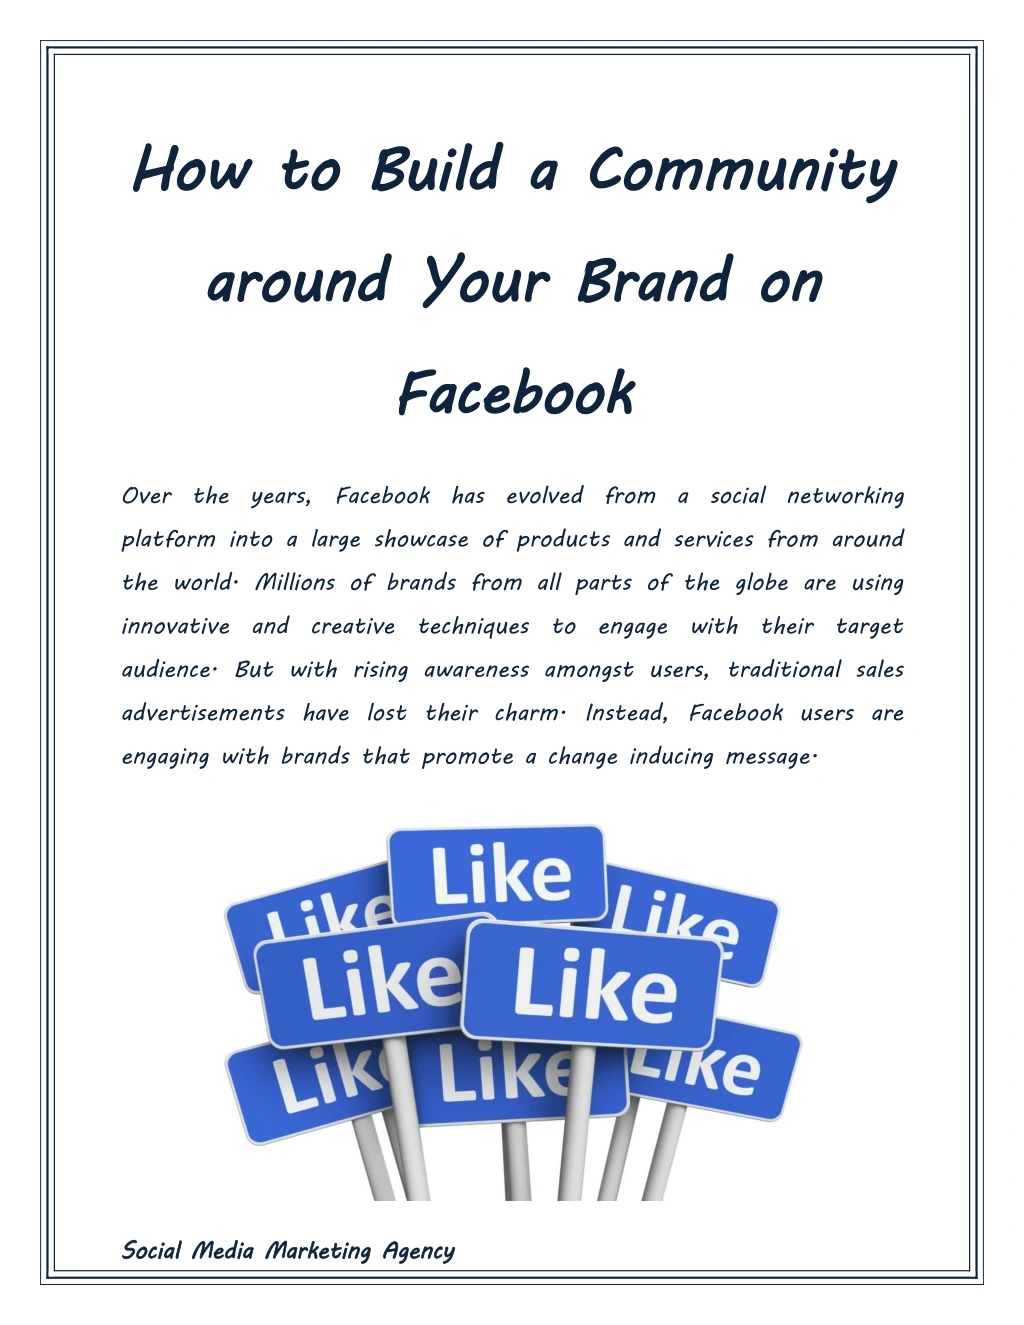 how to build a community around facebook